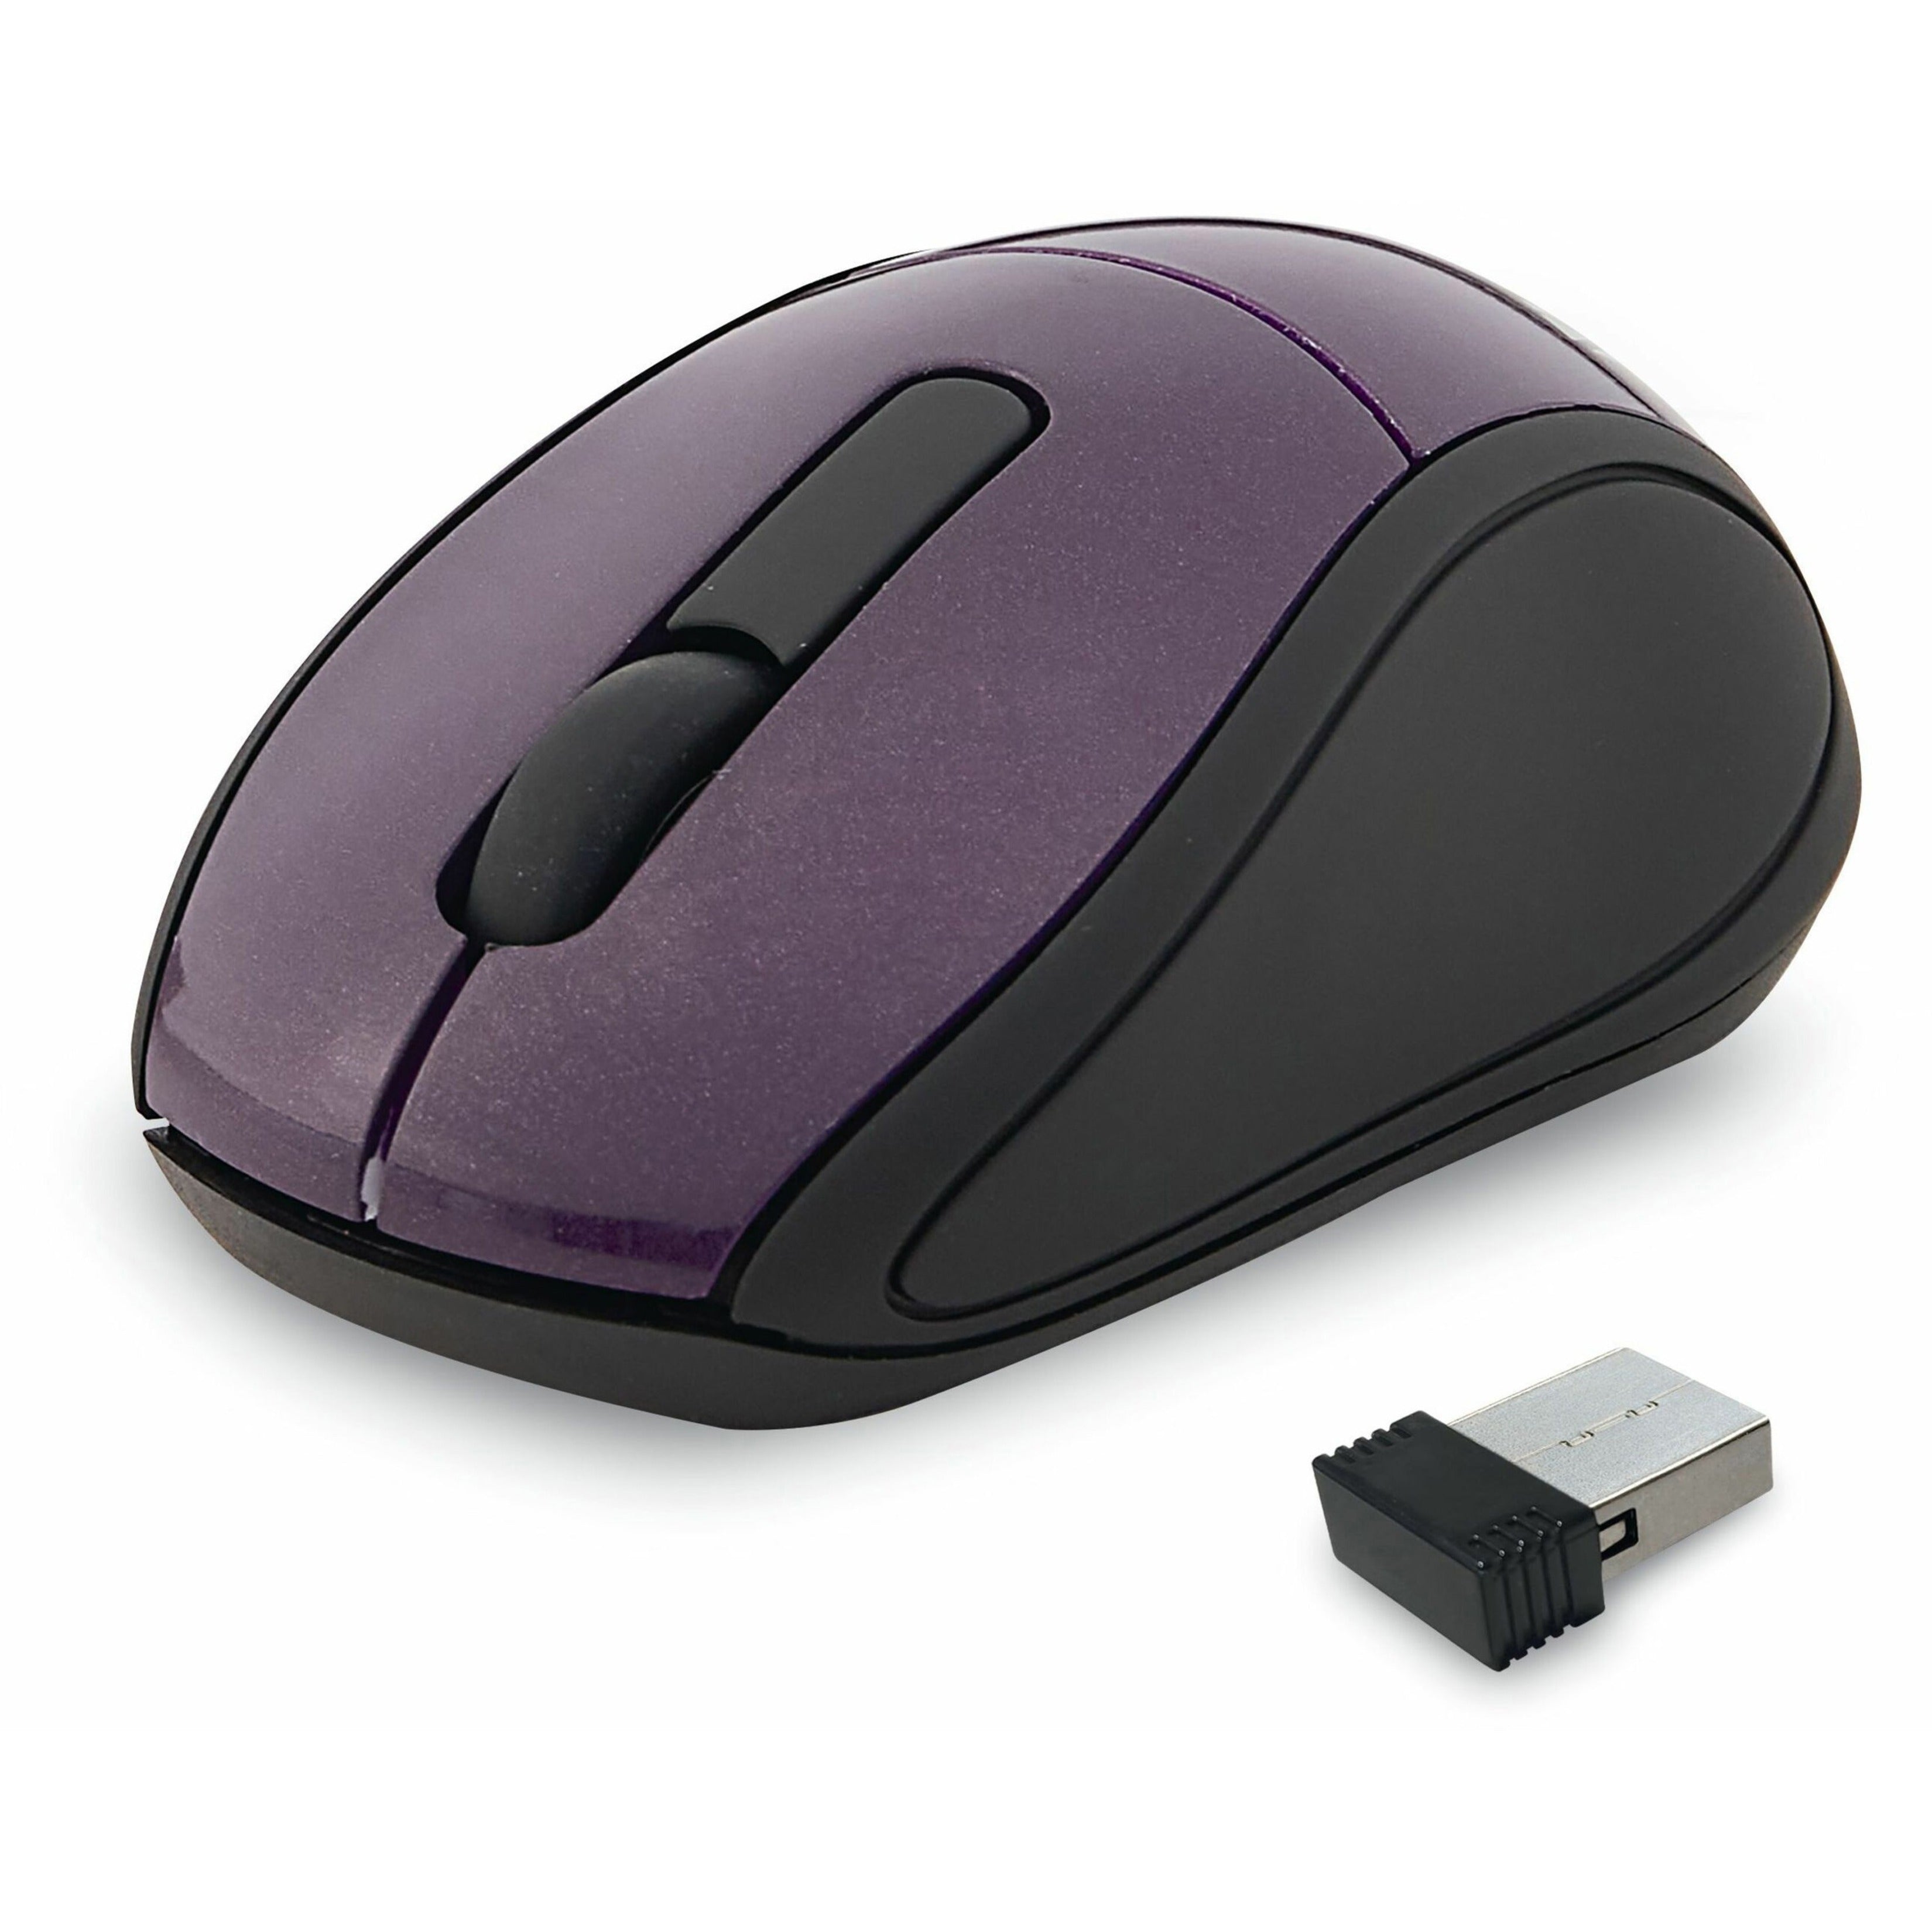 Mouse & Computer Mice | Network Hardwares